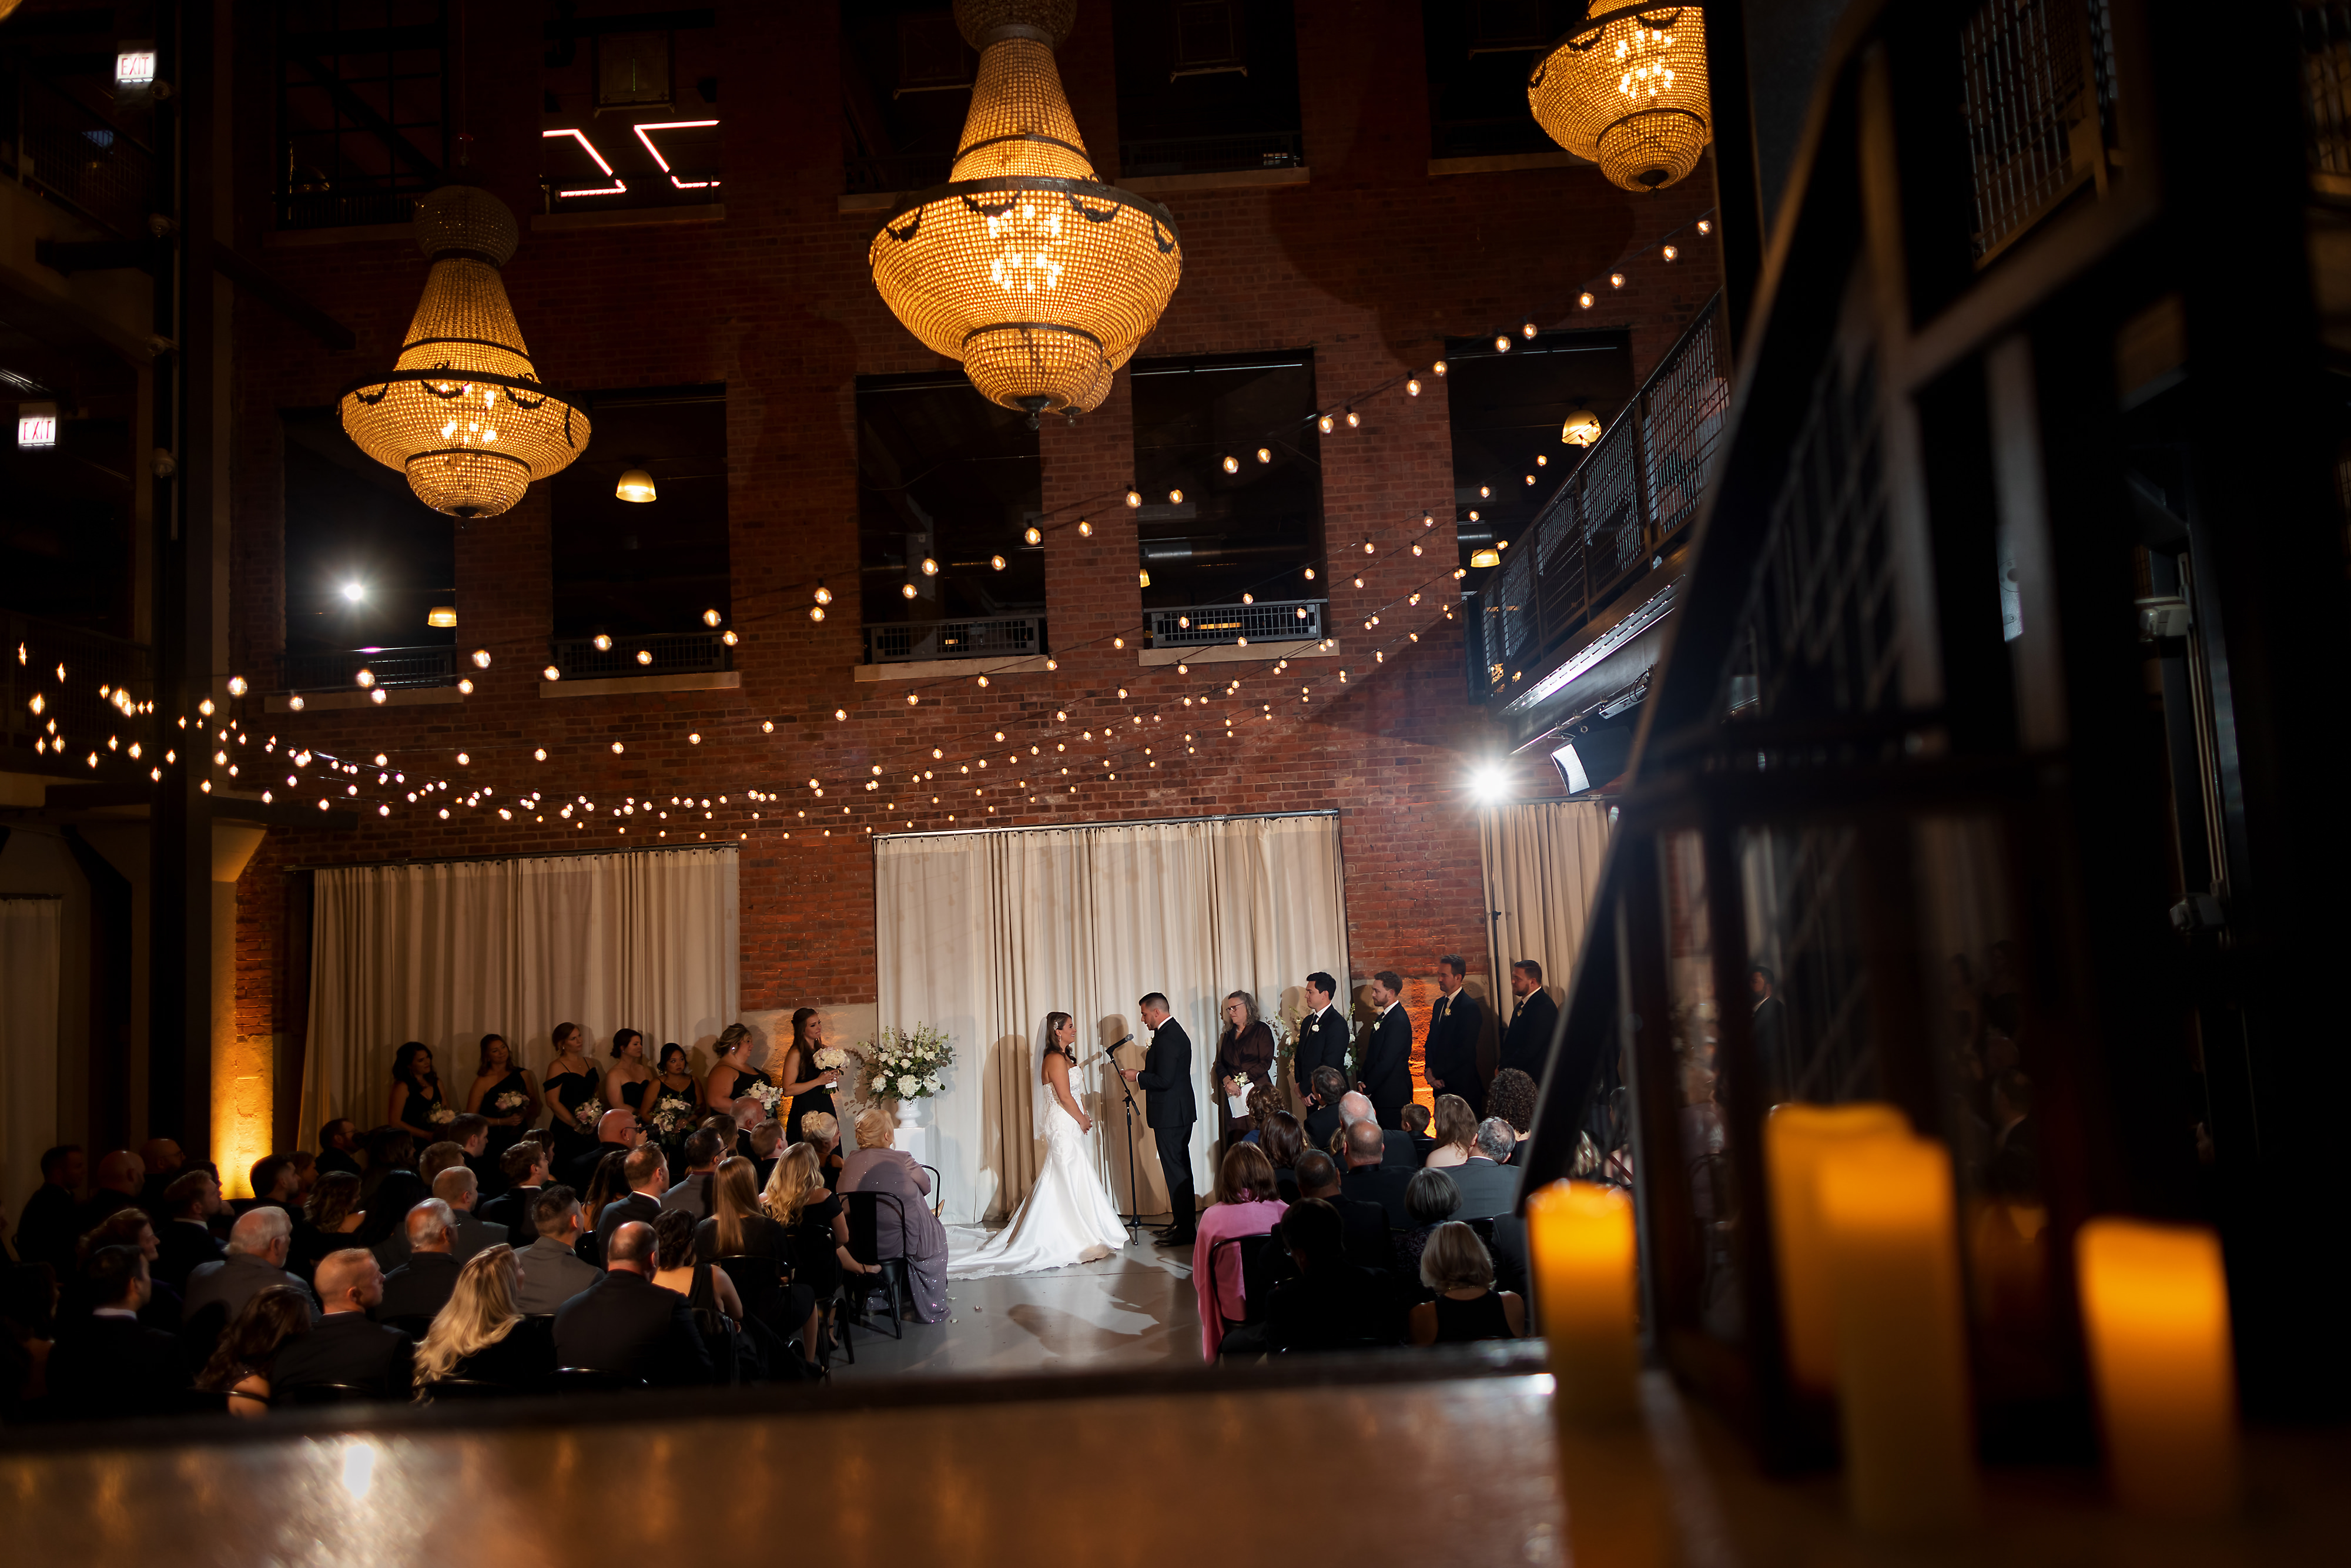 Wide angle view of North Atrium ceremony space with candles and chandeliers during wedding ceremony at Artifact Events in Chicago's Ravenswood neighborhood.